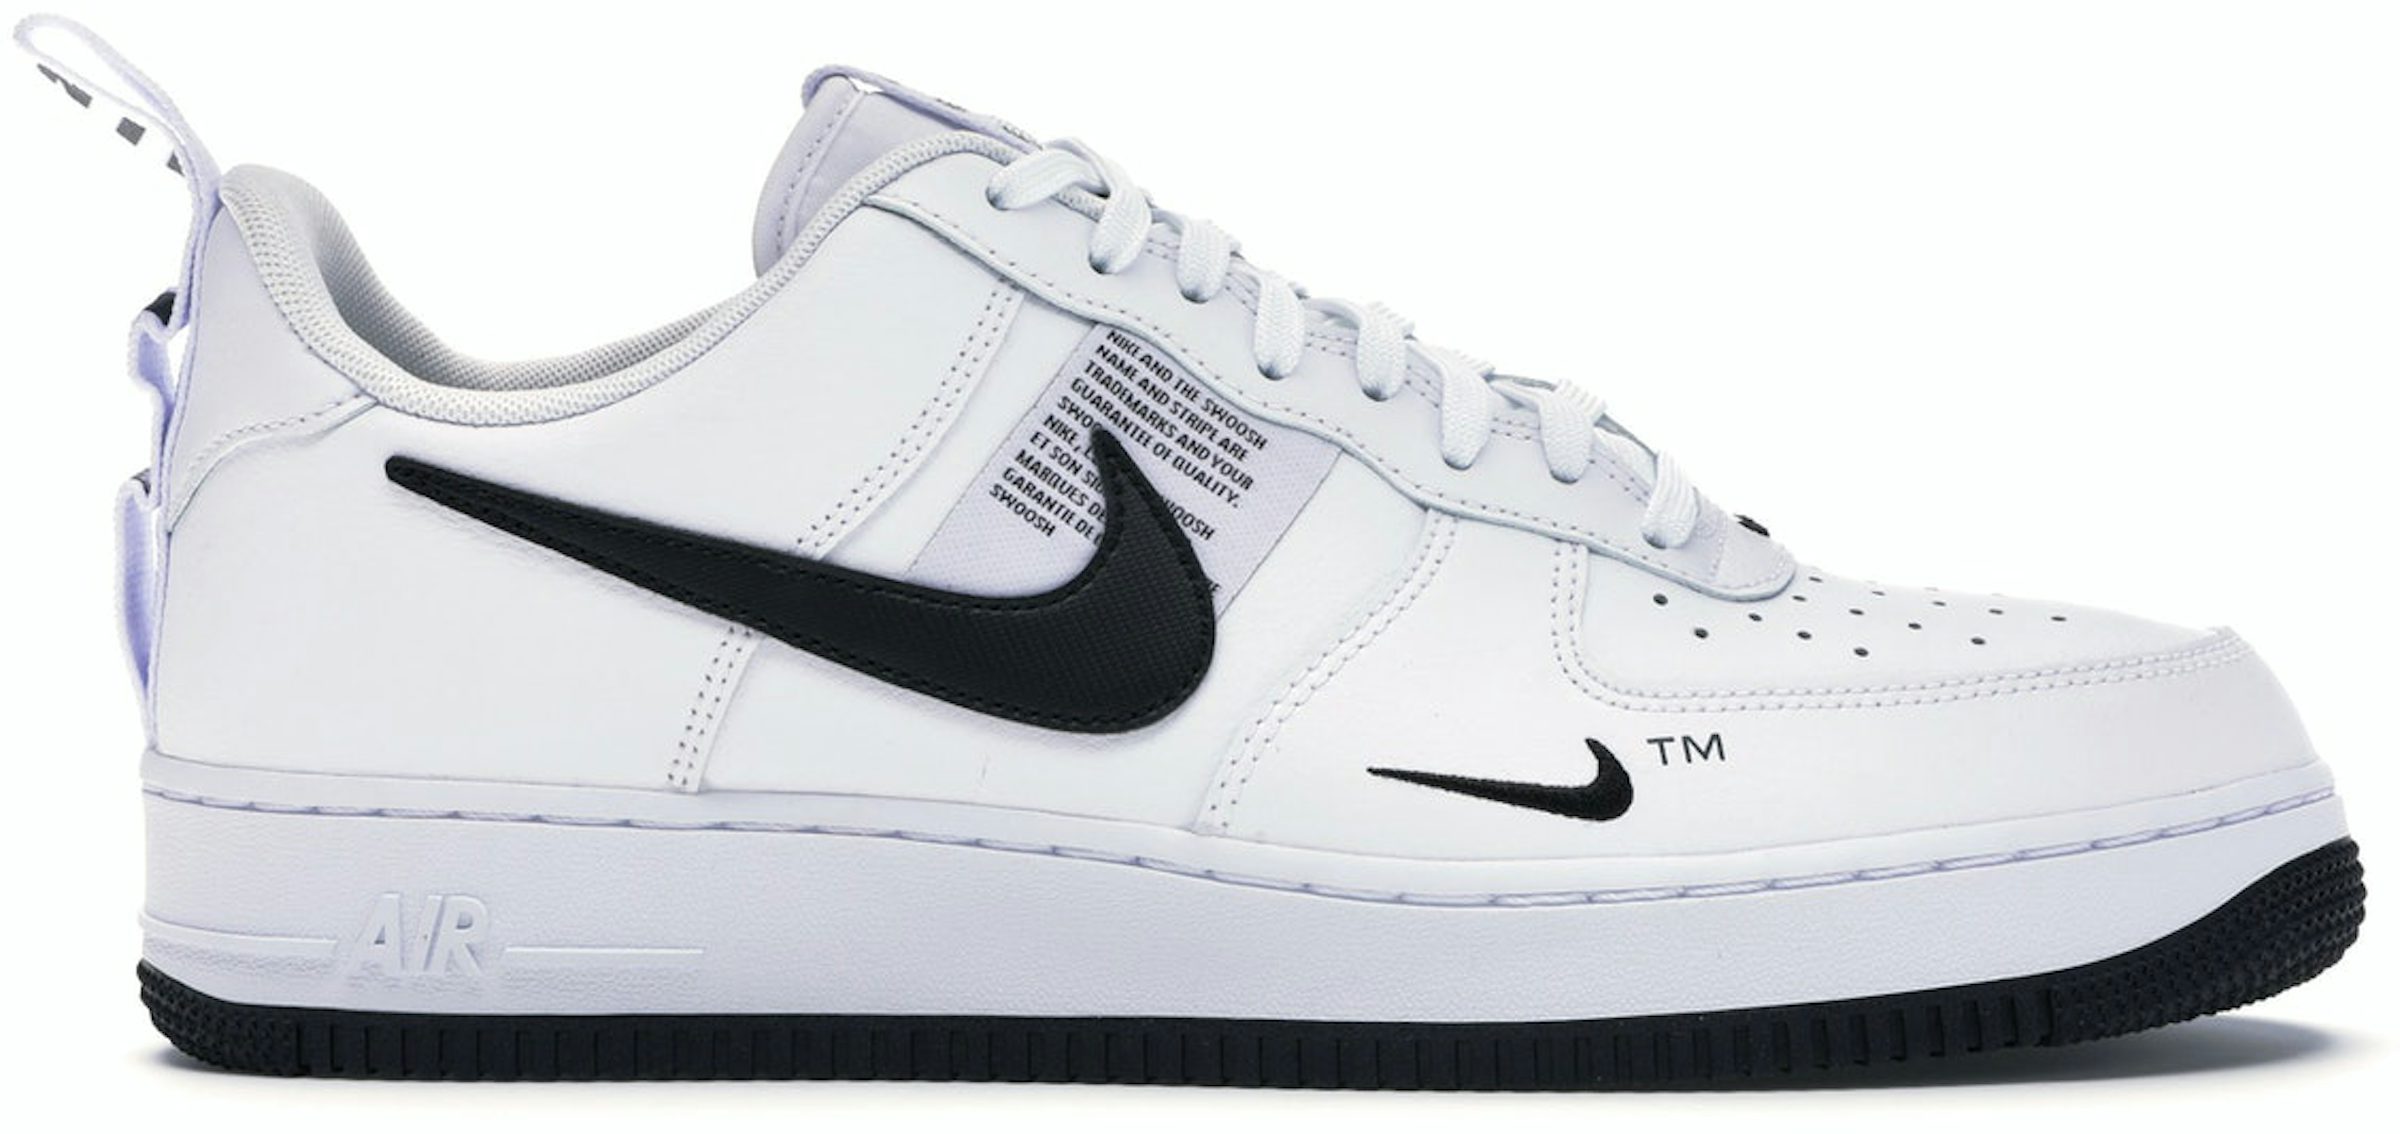 Frustratie Bungalow Vader Nike Air Force 1 LV8 UL Utility White Men's - CQ4611-100 - US